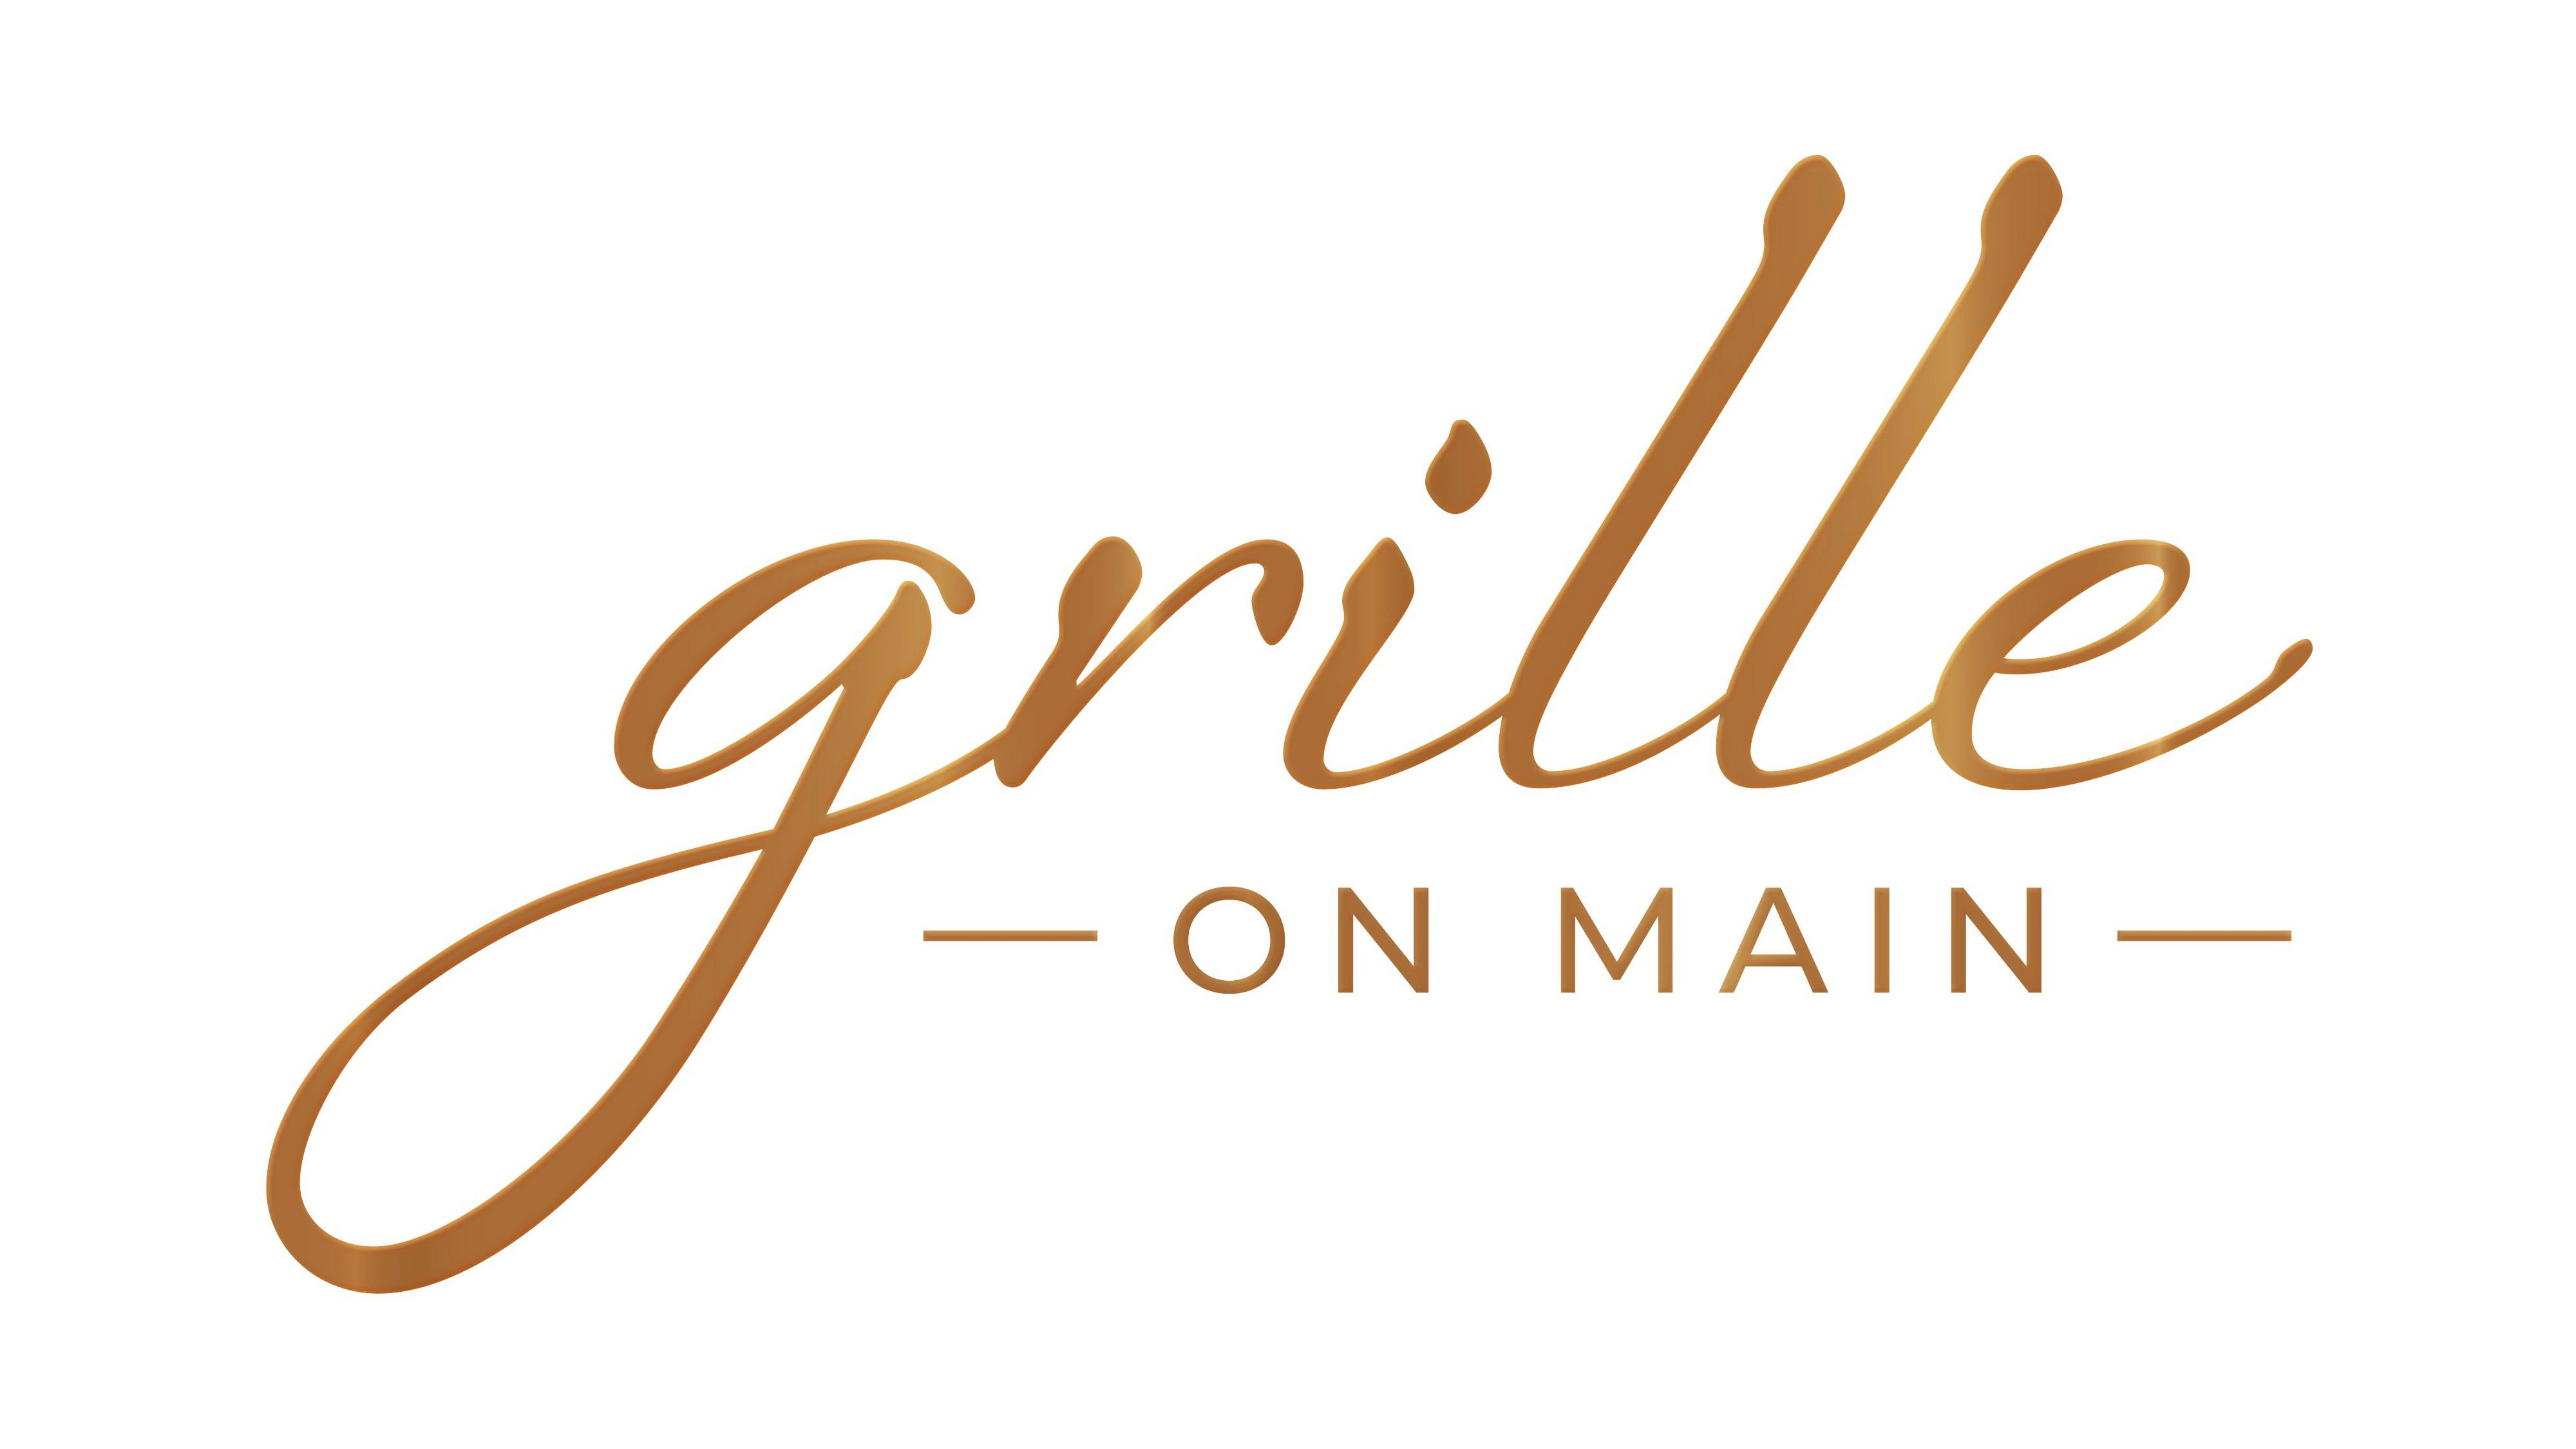  GRILLE ON MAIN